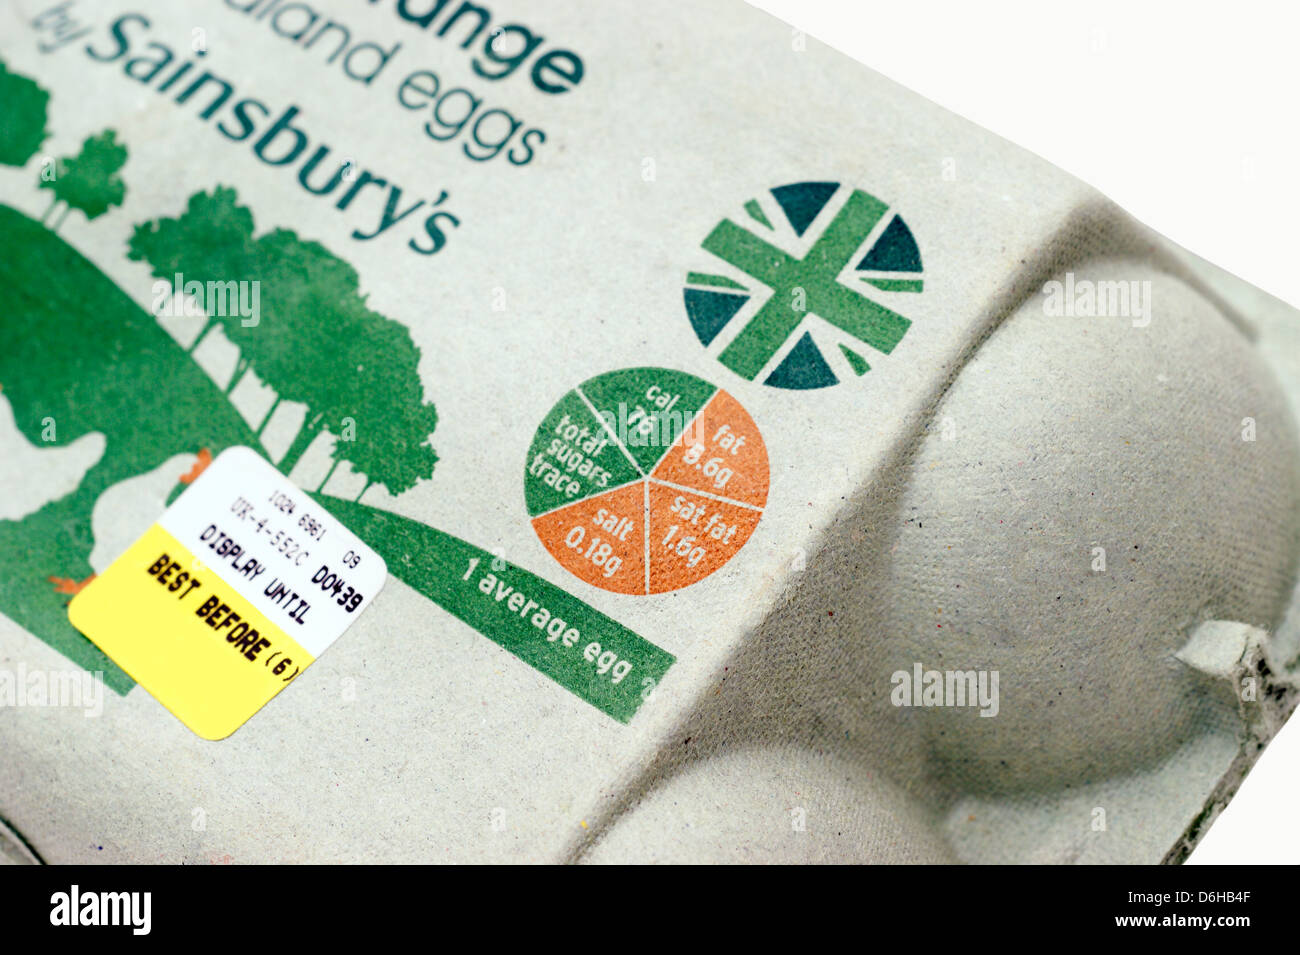 A box of Sainsbury's woodland free eggs with logos of traffic lights ...